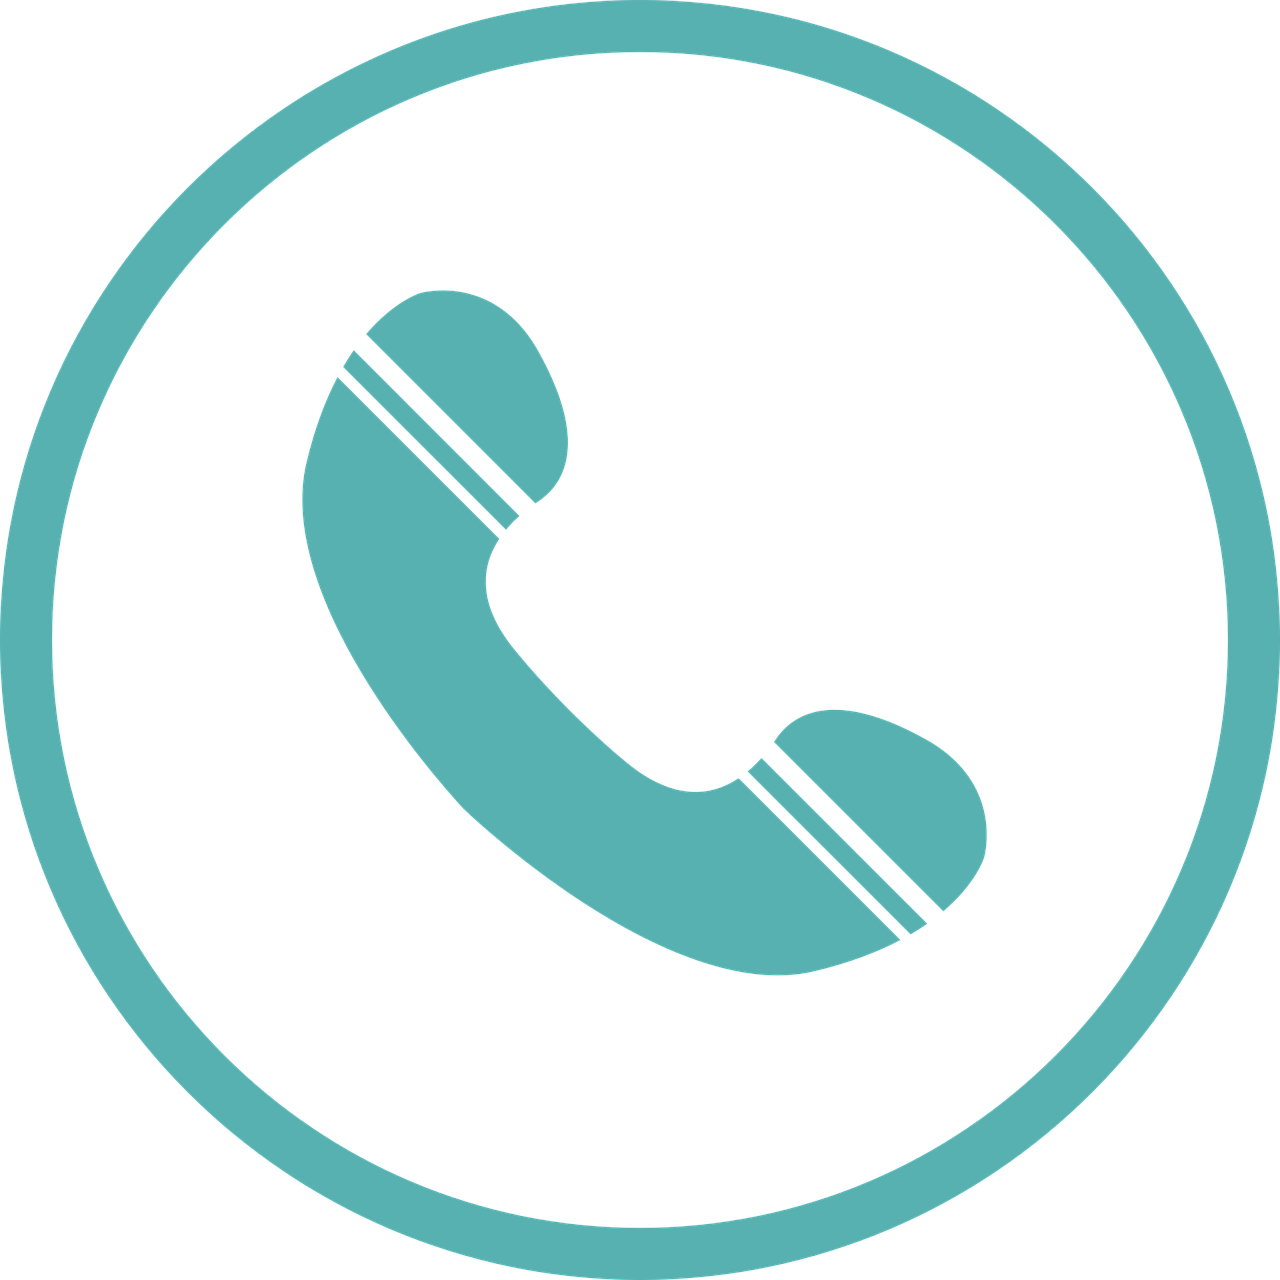 a phone icon in a circle on a black background, by Josef Čapek, pixabay, hurufiyya, teals, telephone pole, ear, teal color graded